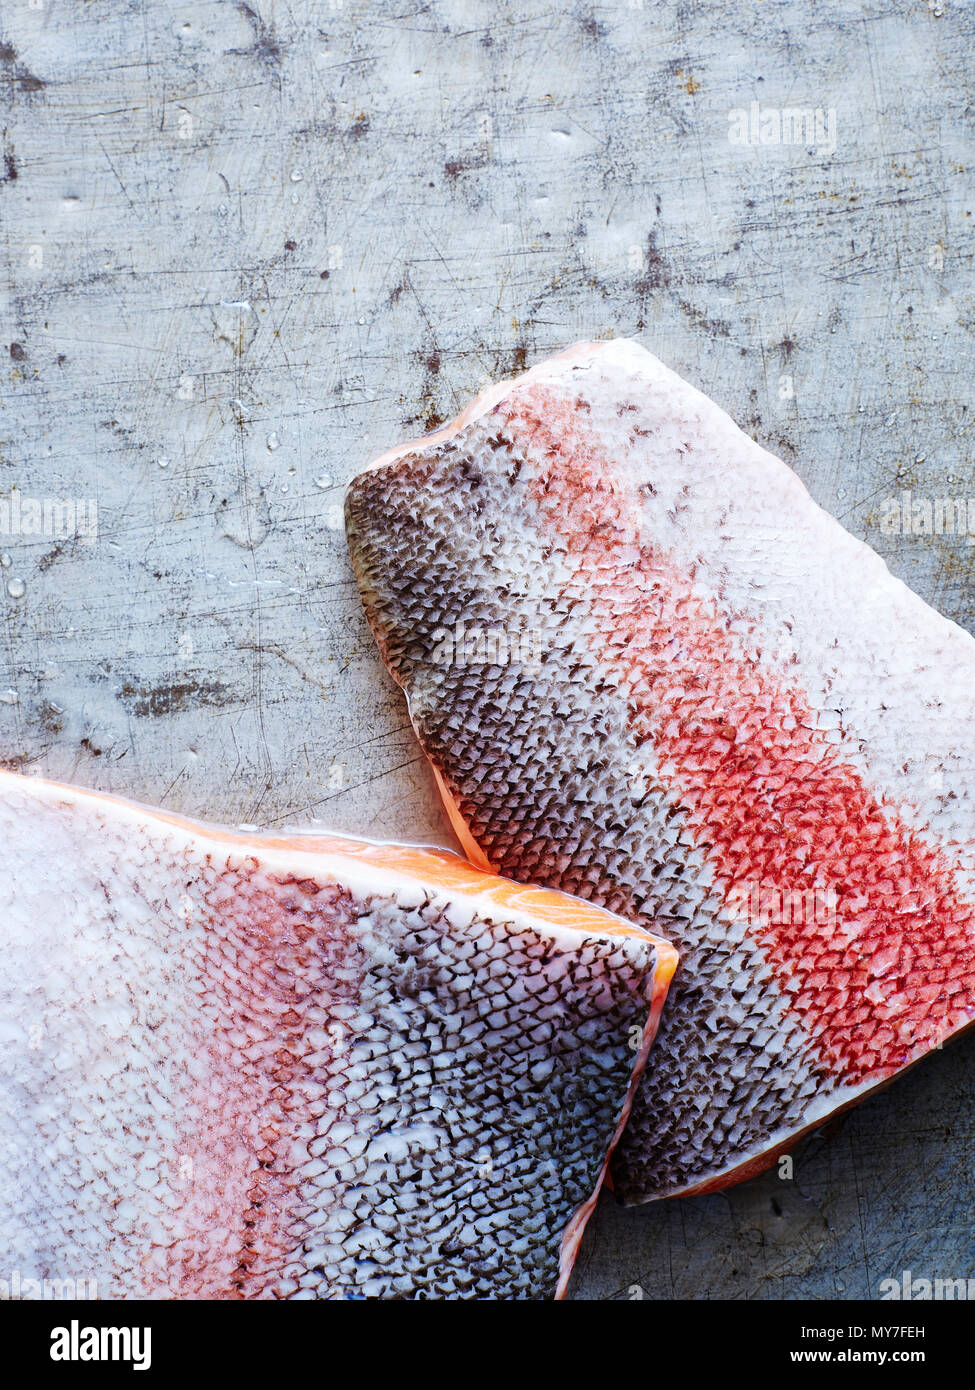 Still life of two pieces of ocean trout, overhead view Stock Photo